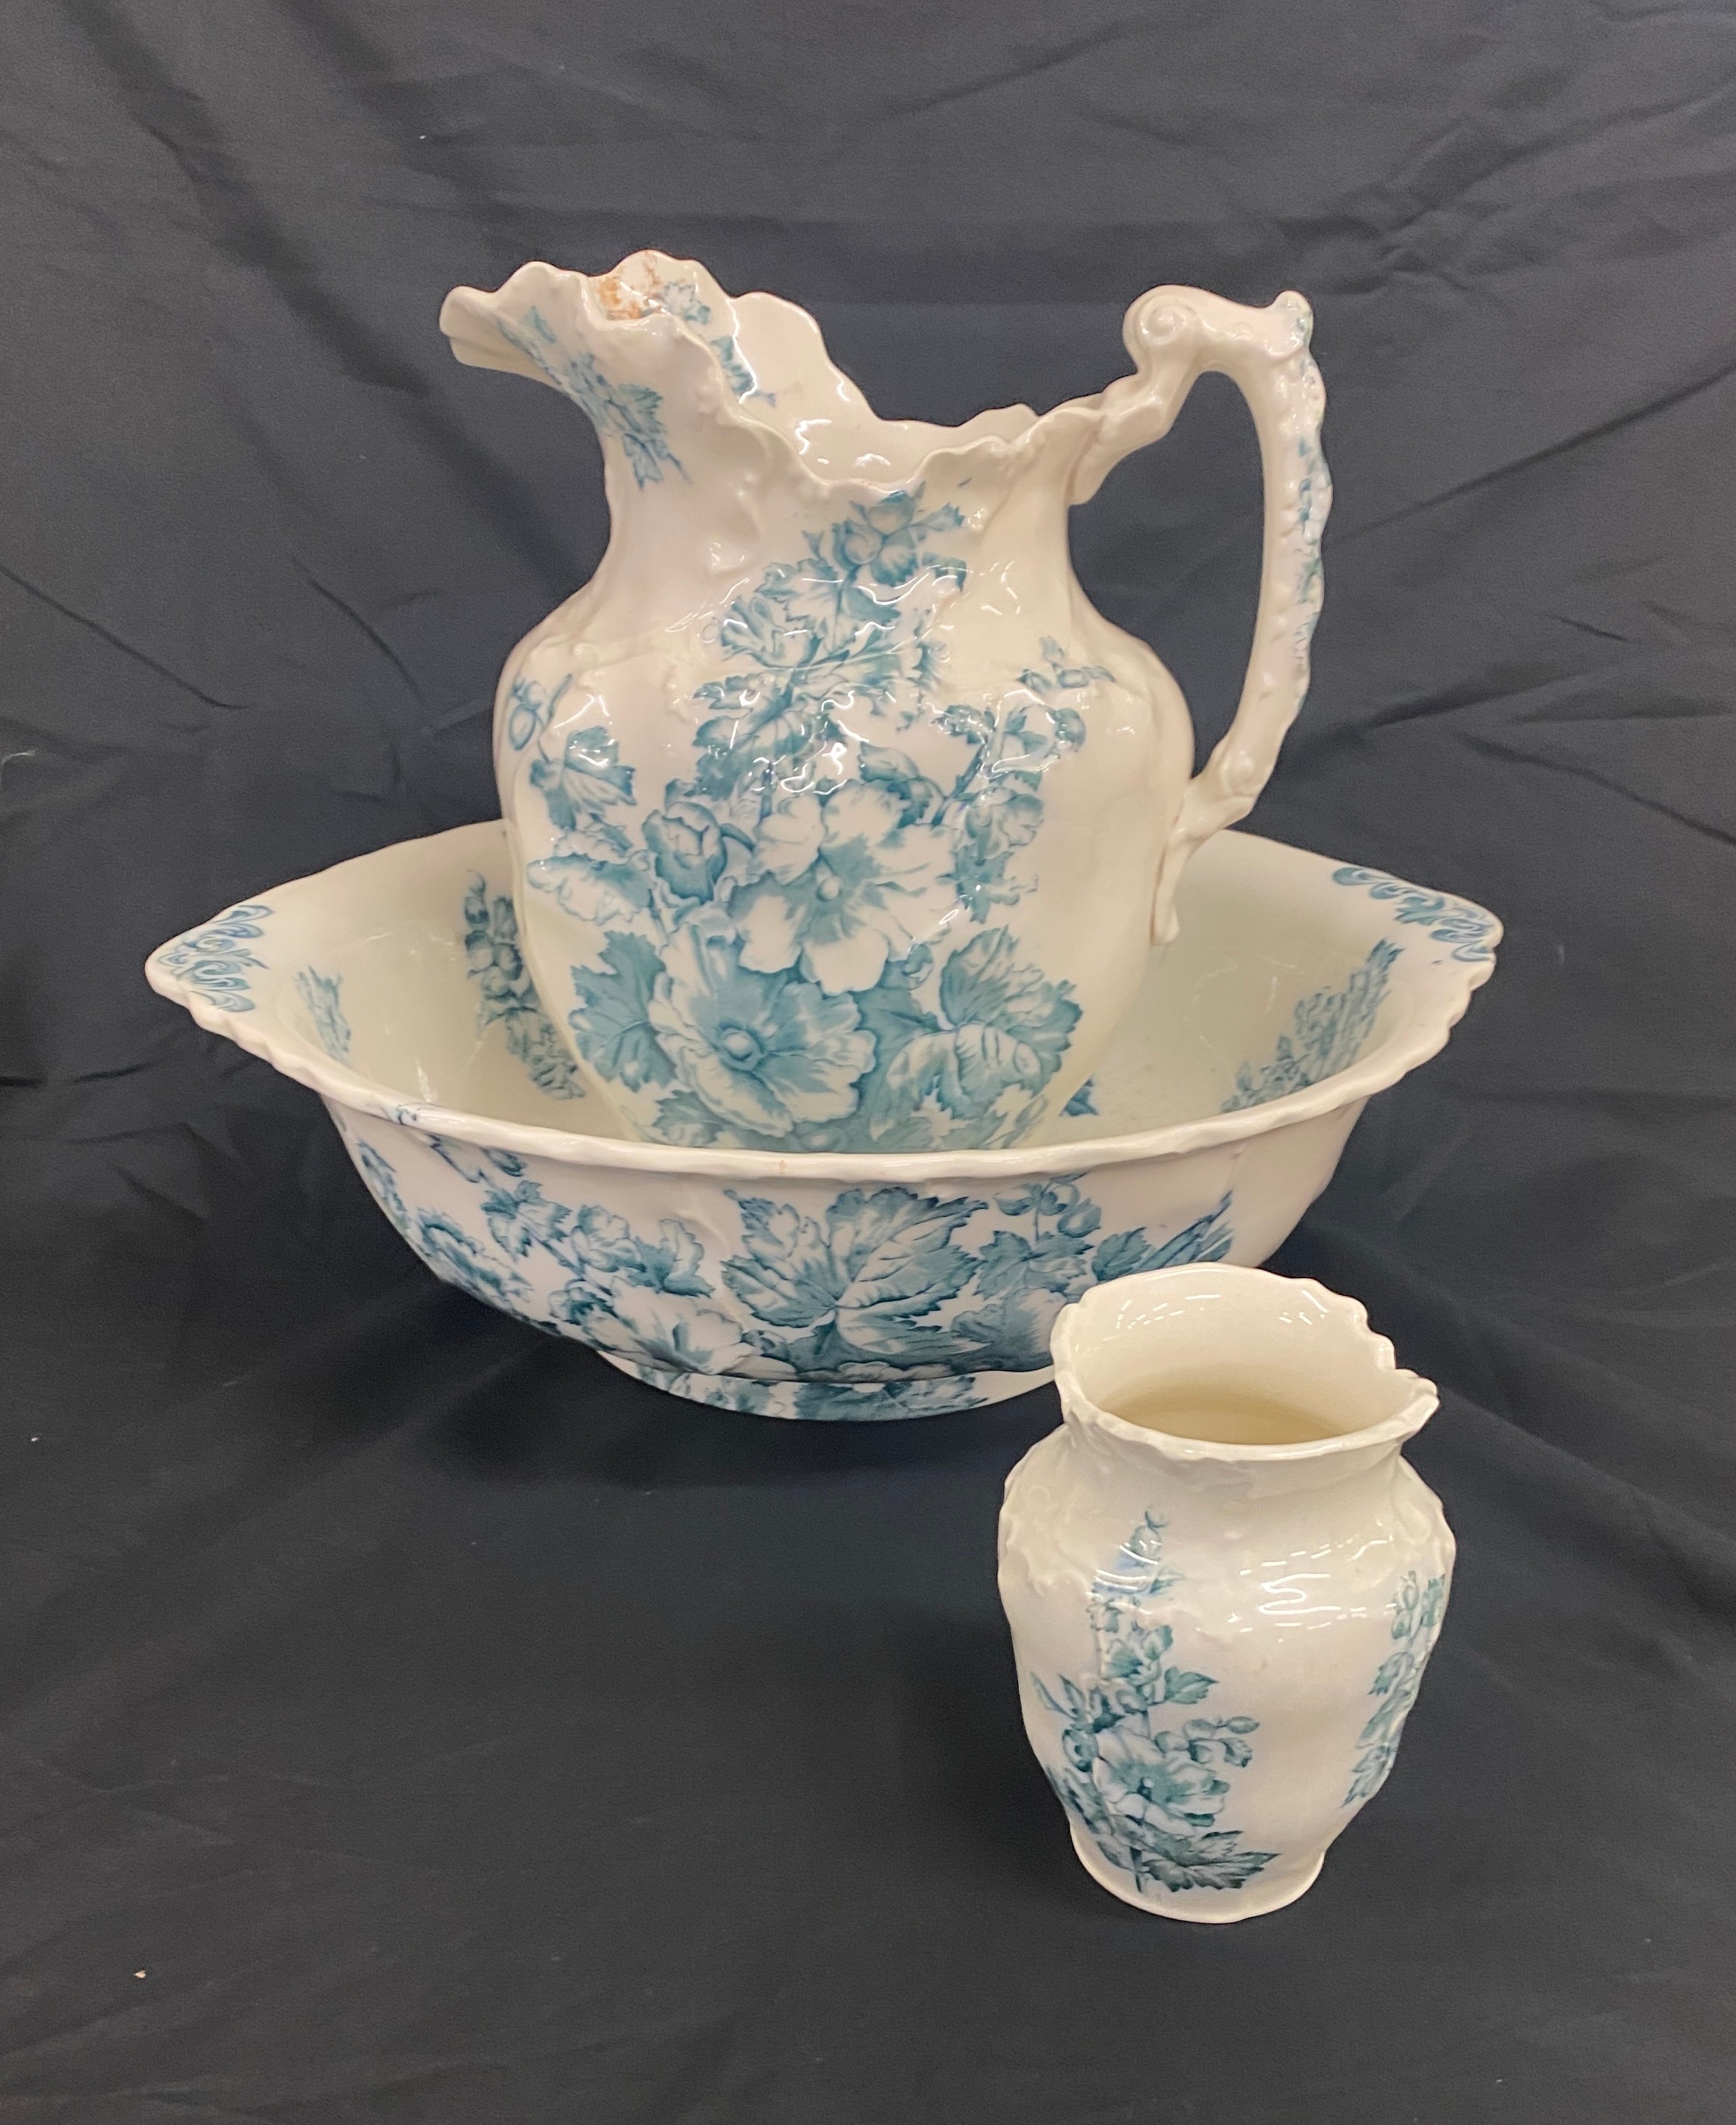 Decorative vintage blue and white jug and bowl